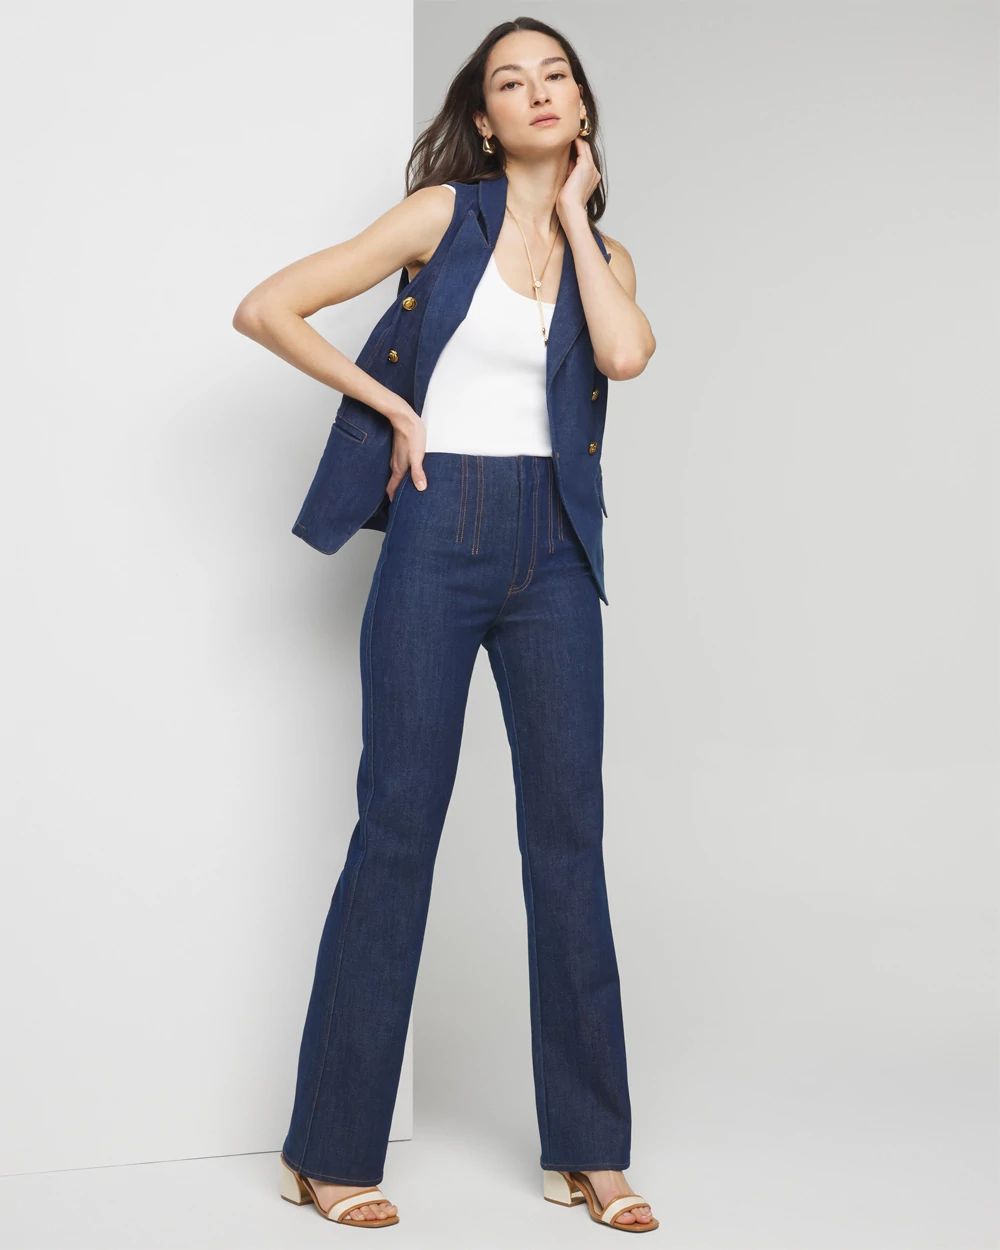 Extra High-Rise Sculpt Denim Trouser click to view larger image.